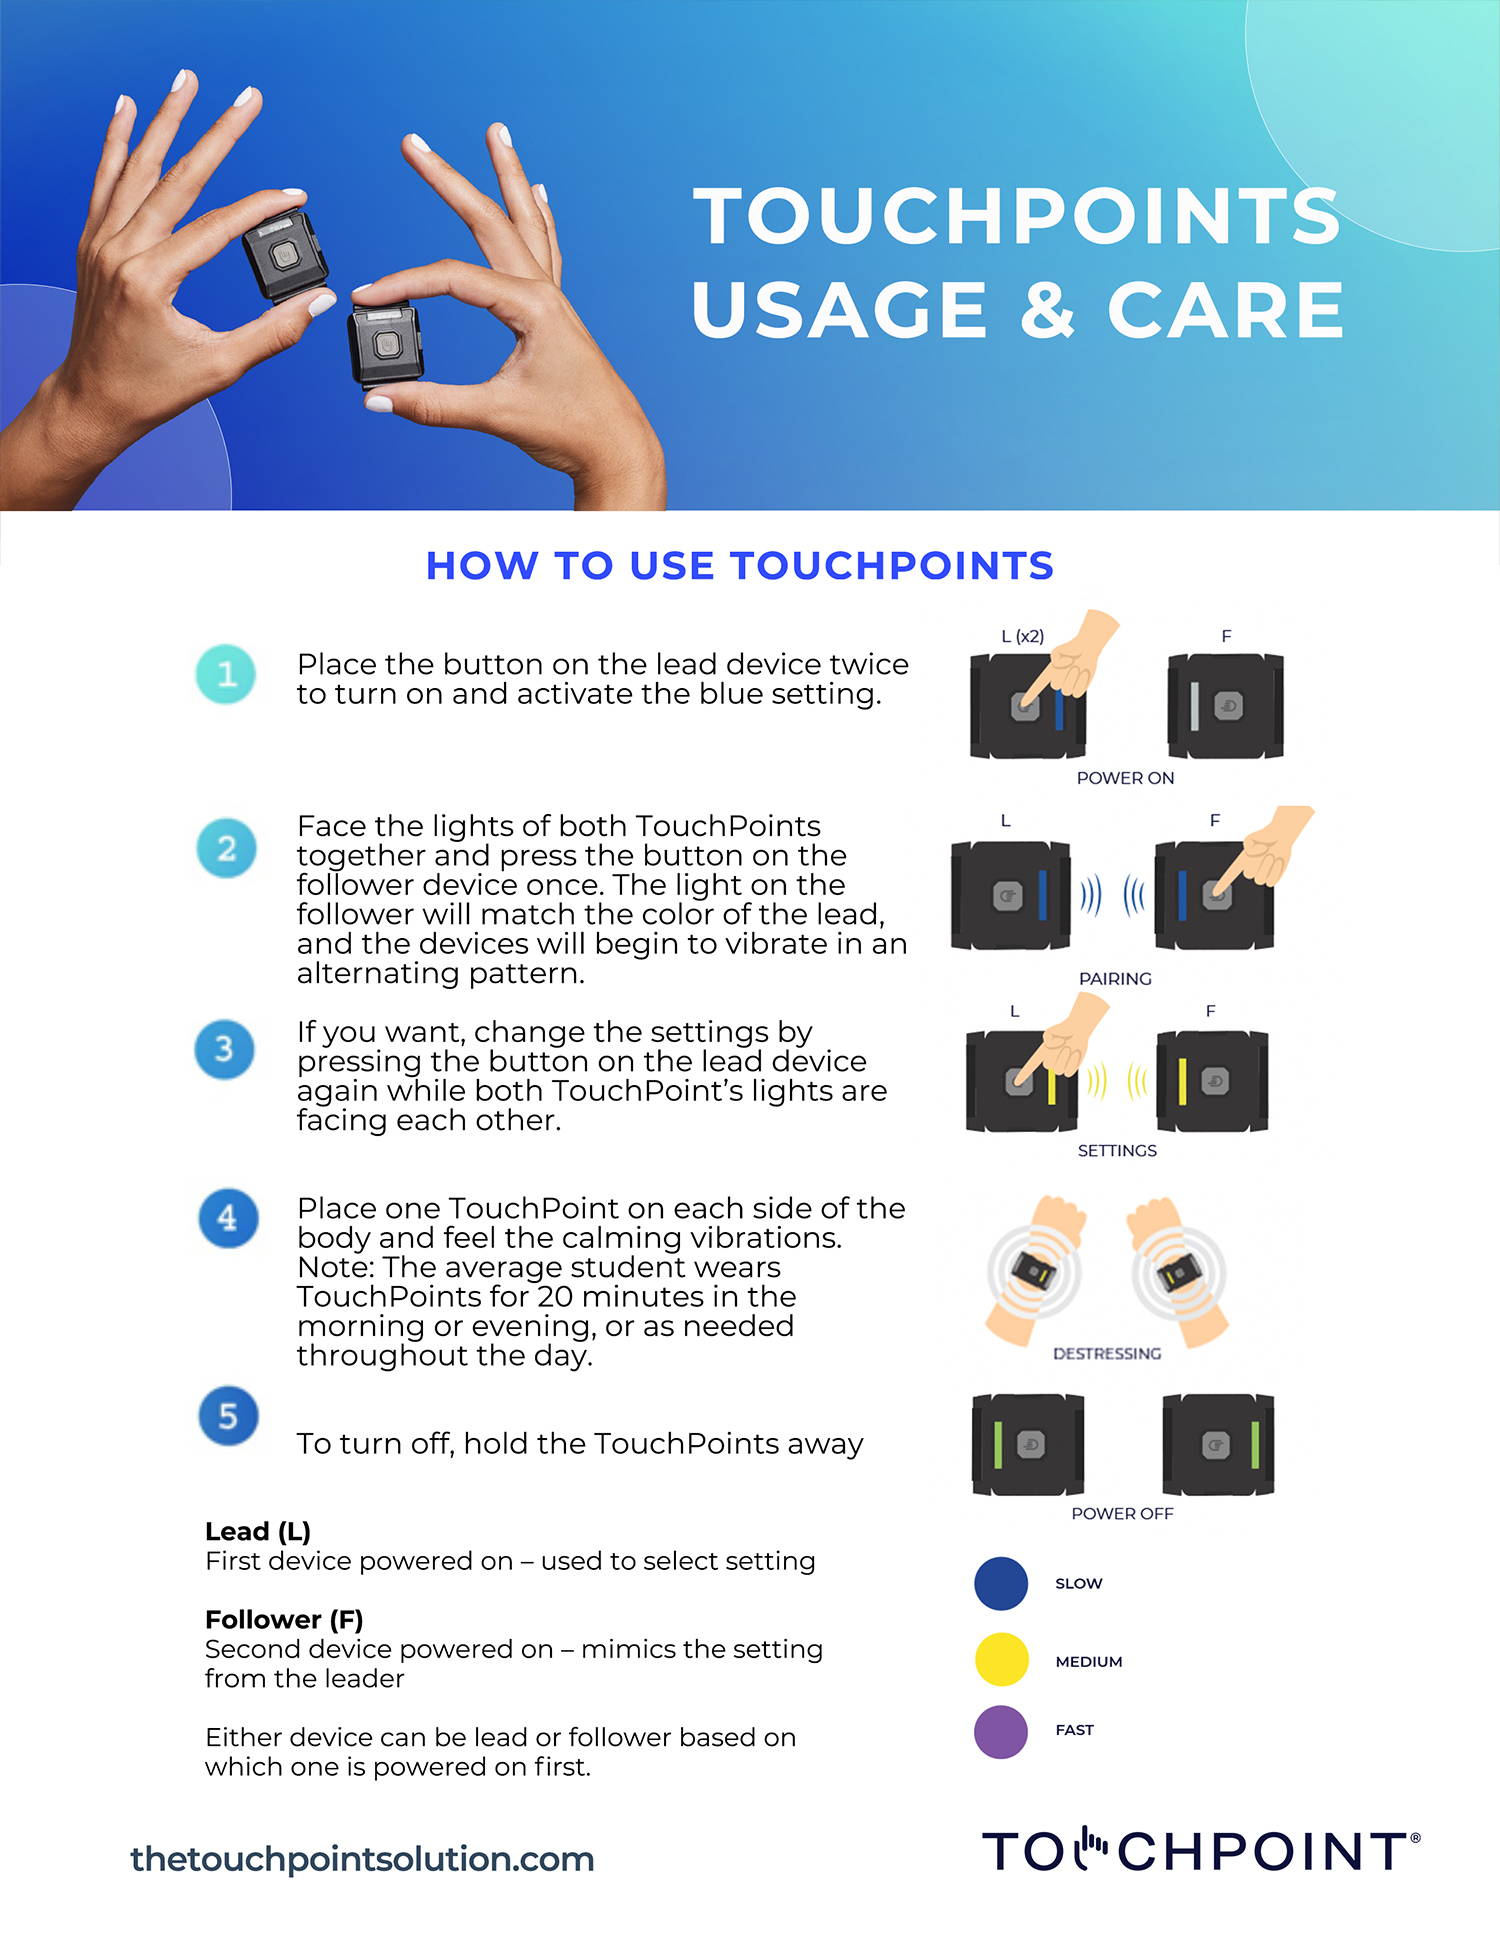 HOW TO USE TOUCHPOINTS